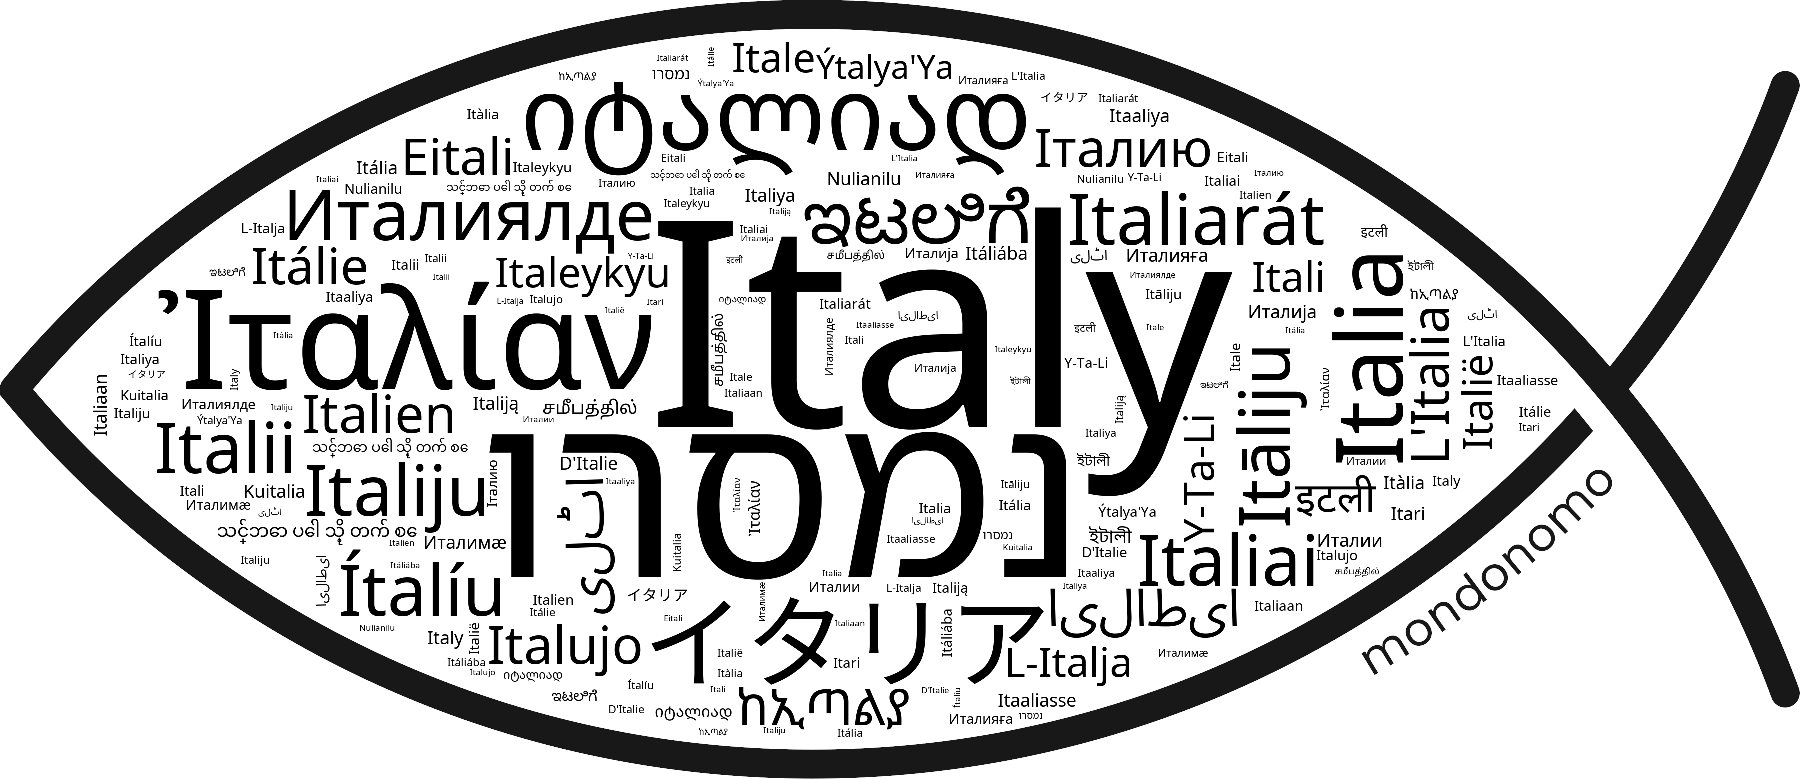 Name Italy in the world's Bibles